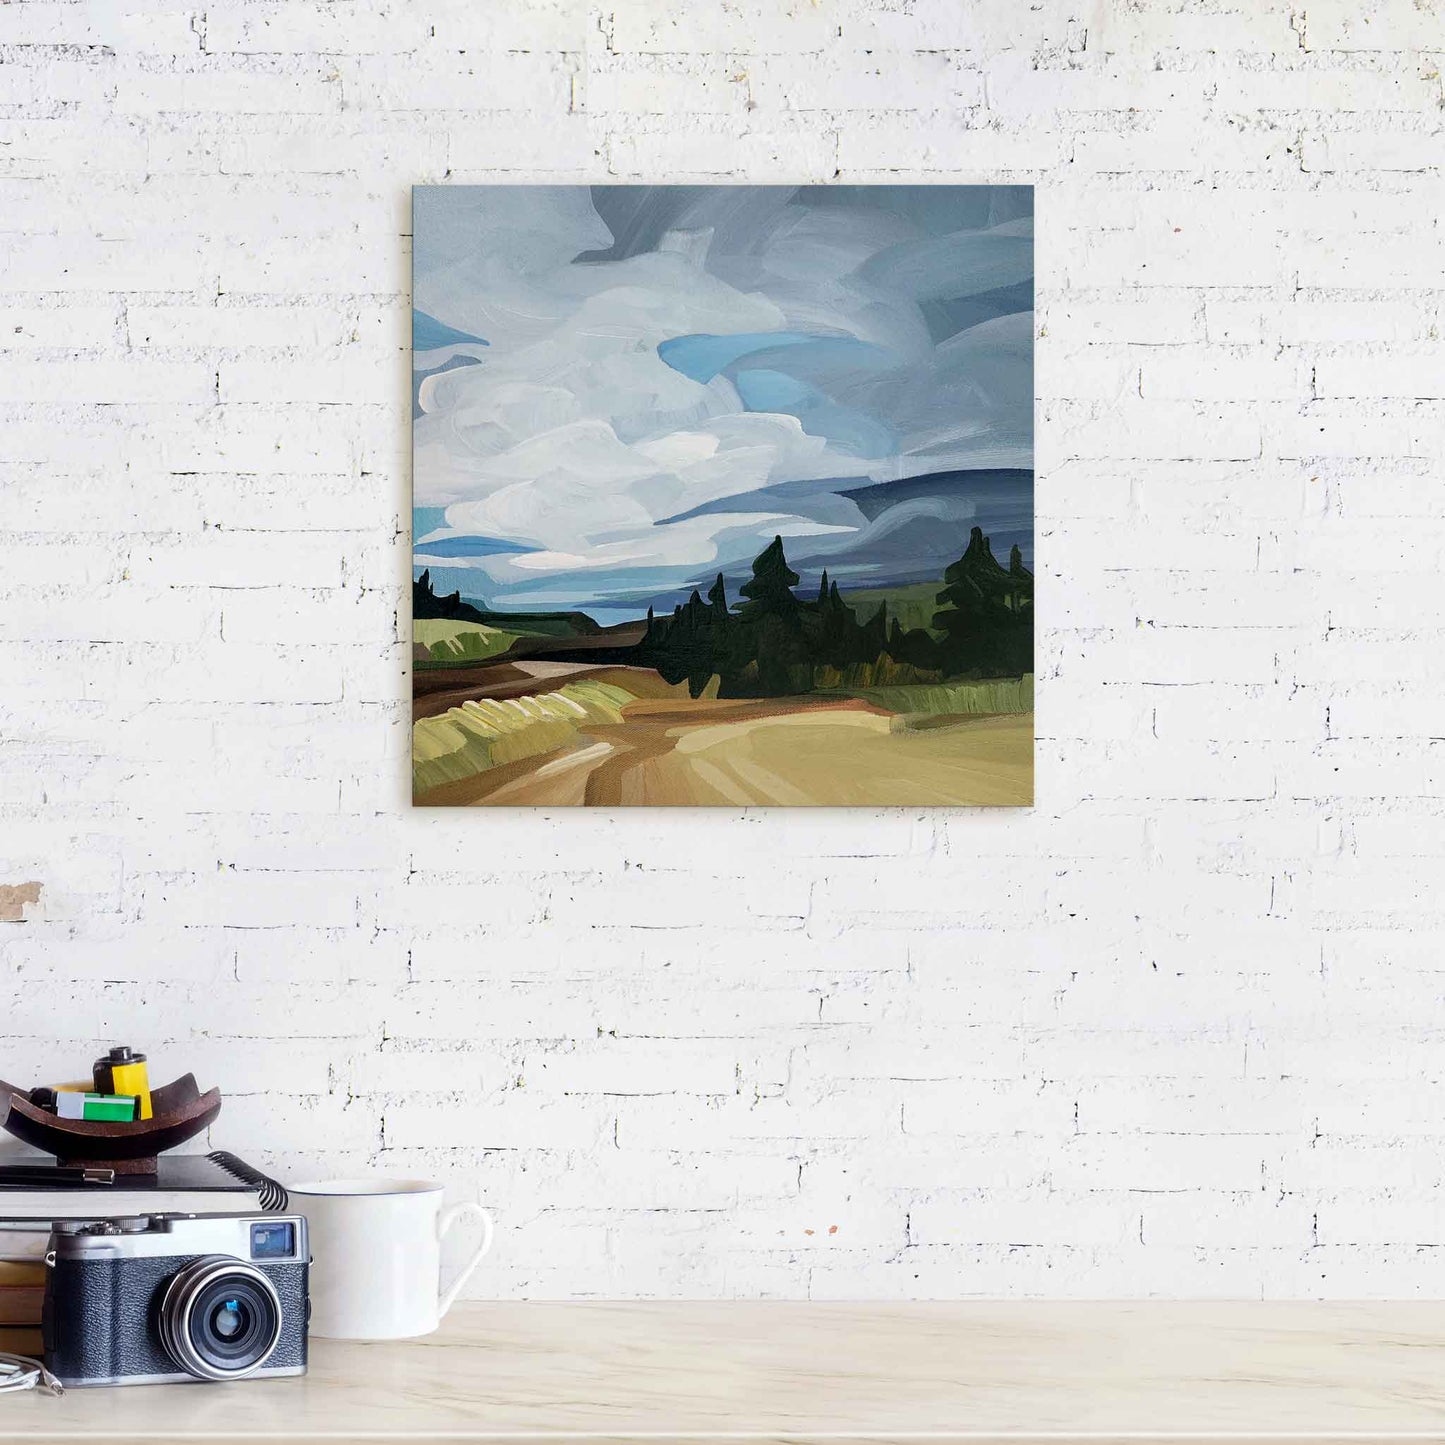 abstract landscape painting on canvas with big blue sky hanging over counter against white brick wall